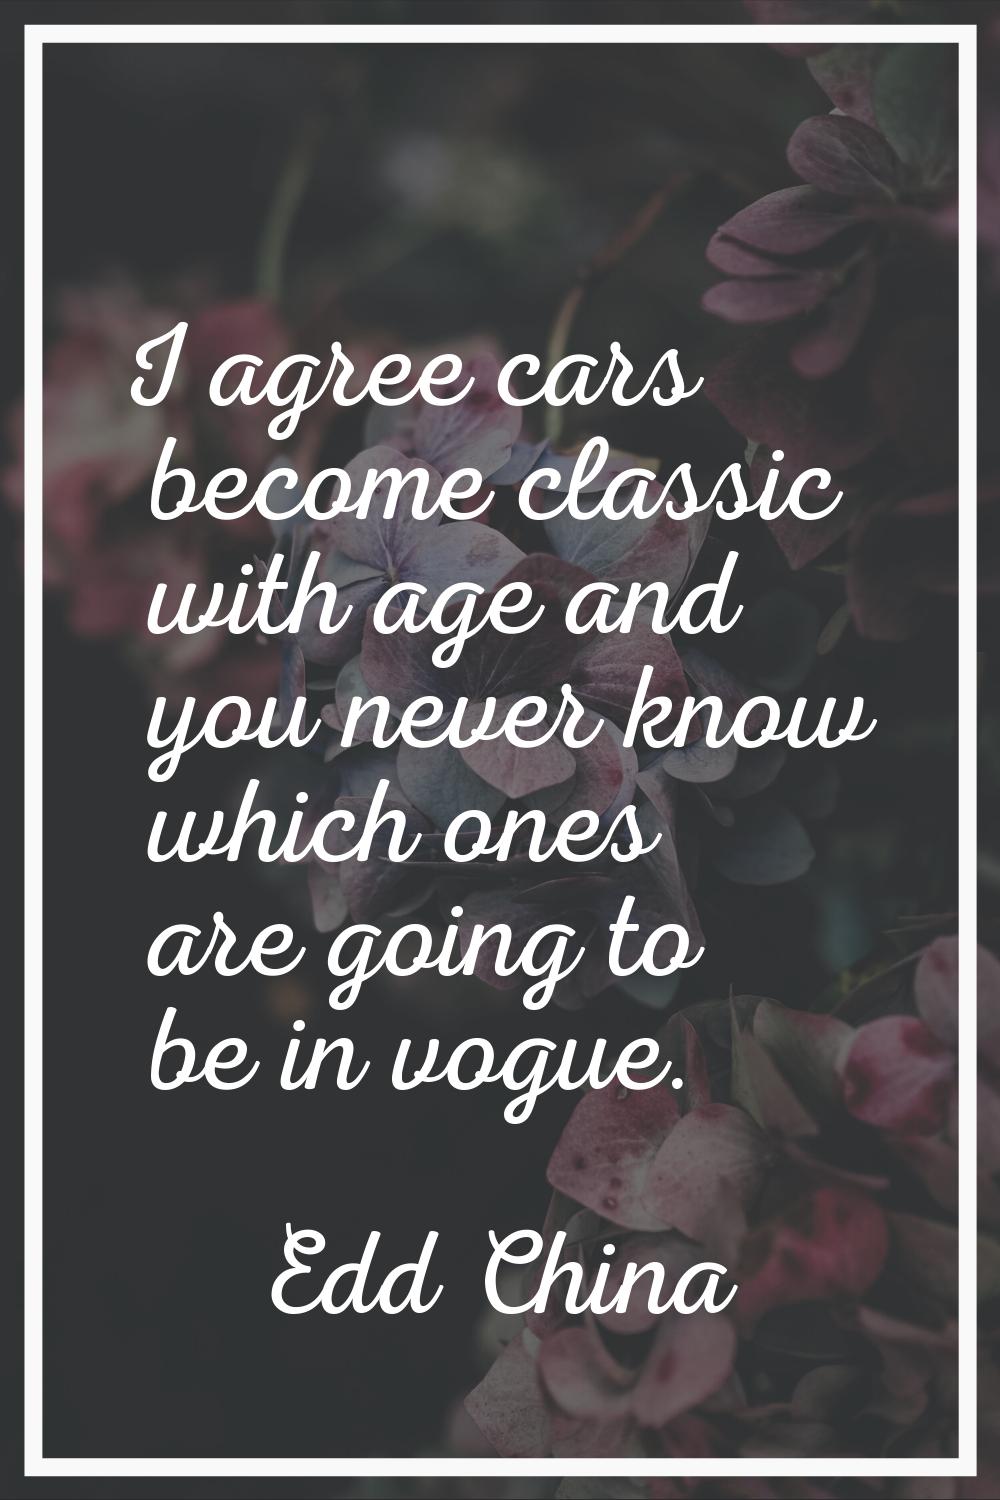 I agree cars become classic with age and you never know which ones are going to be in vogue.